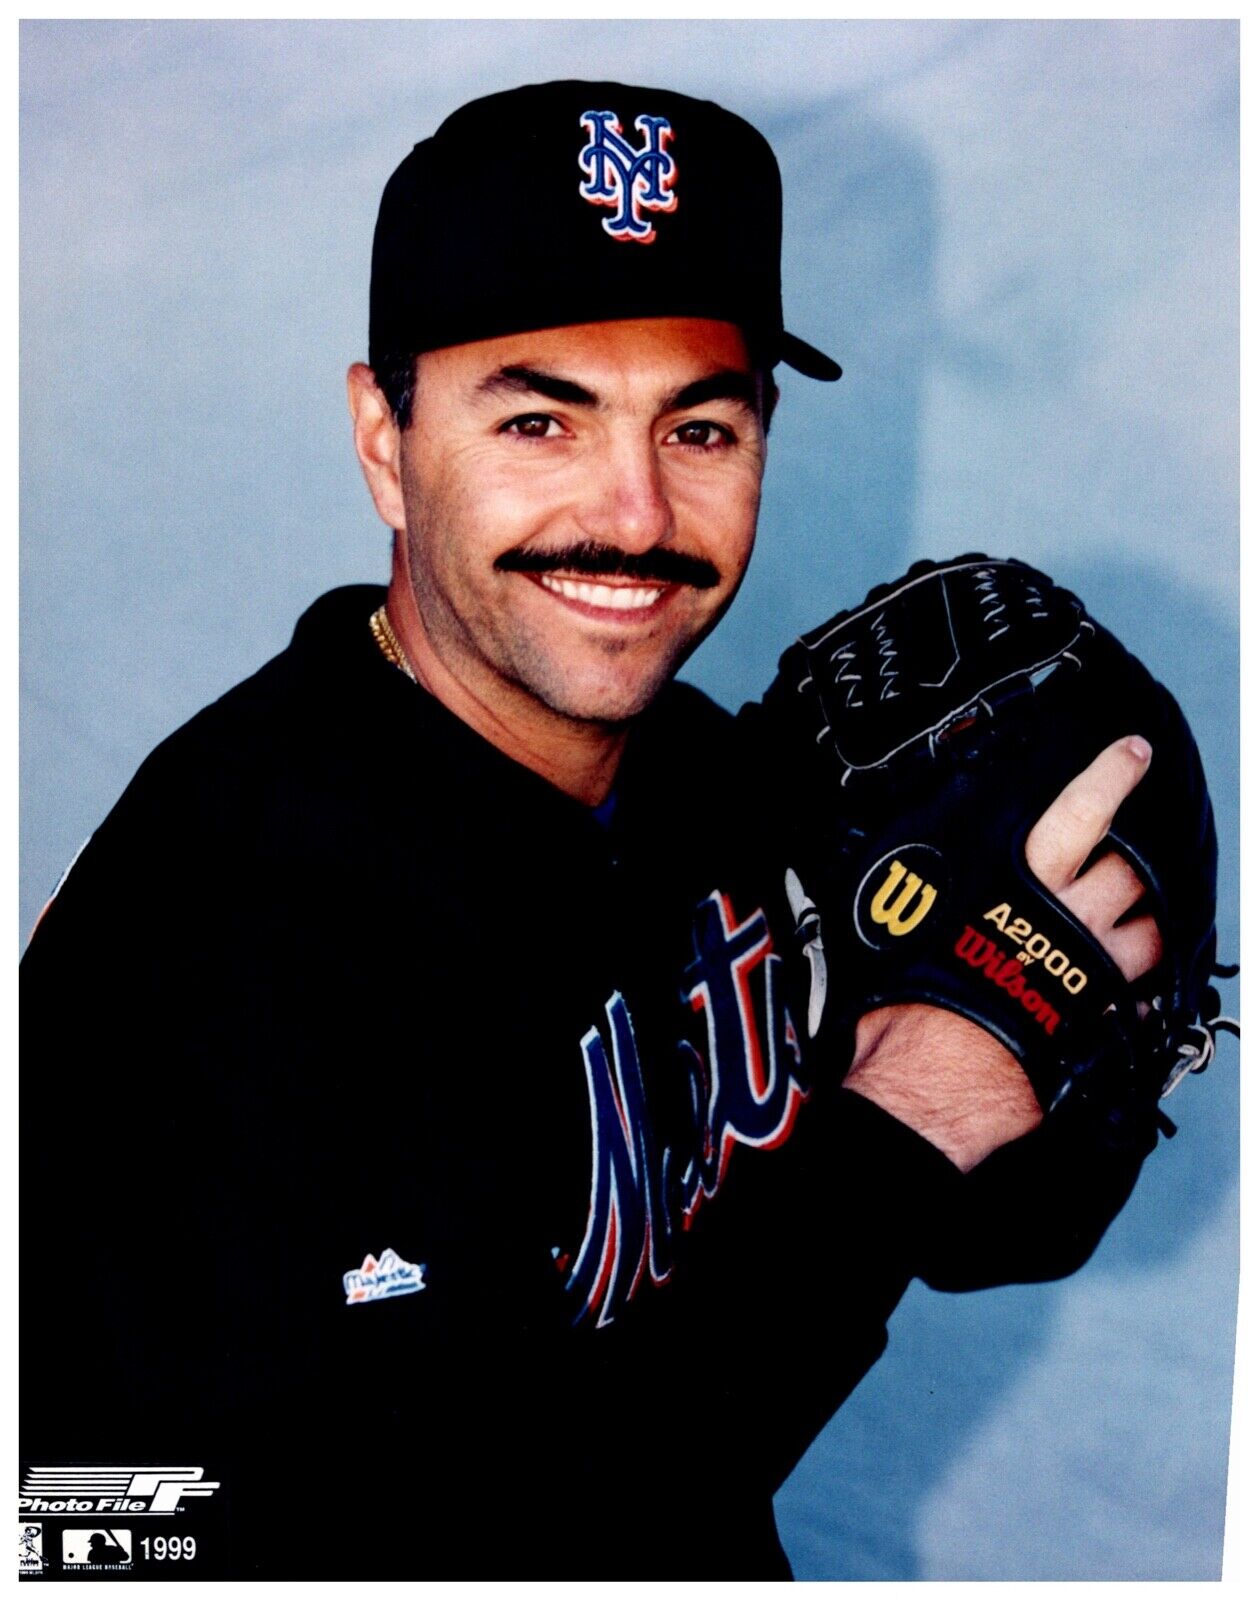 John Franco New York Mets 8x10 Sports Photo A Unsigned 1999